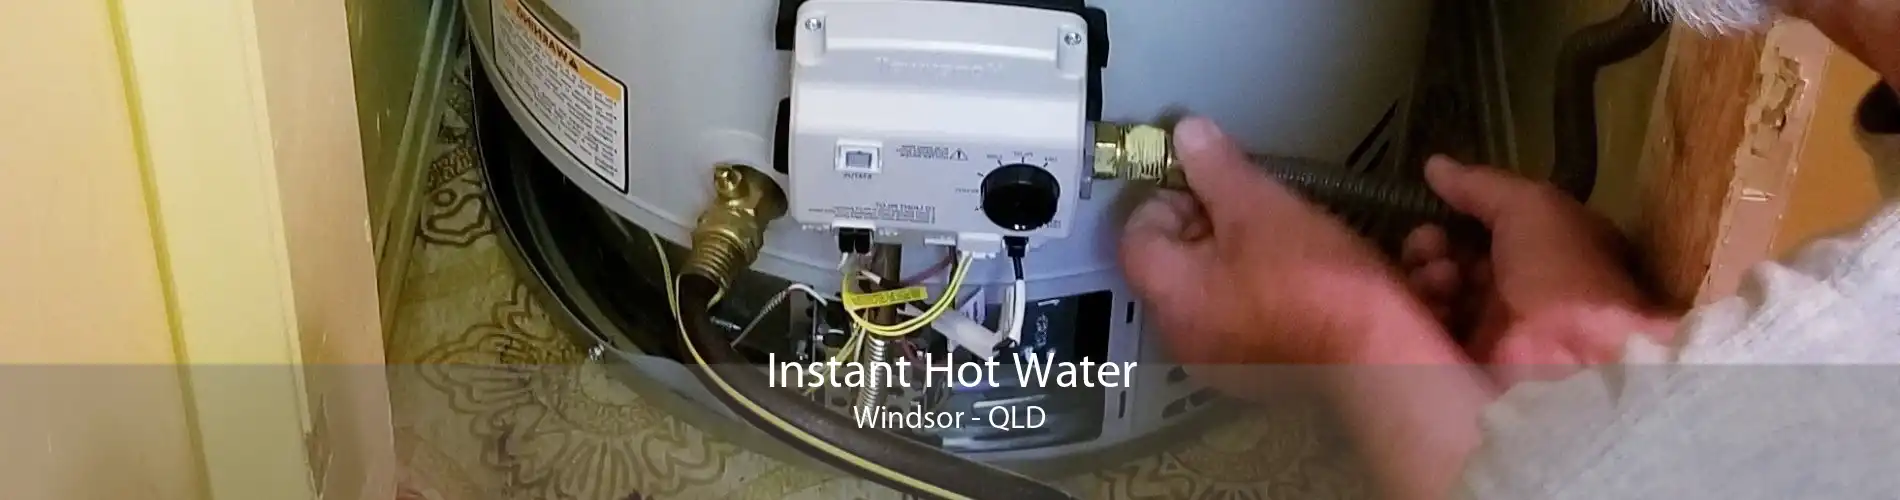 Instant Hot Water Windsor - QLD